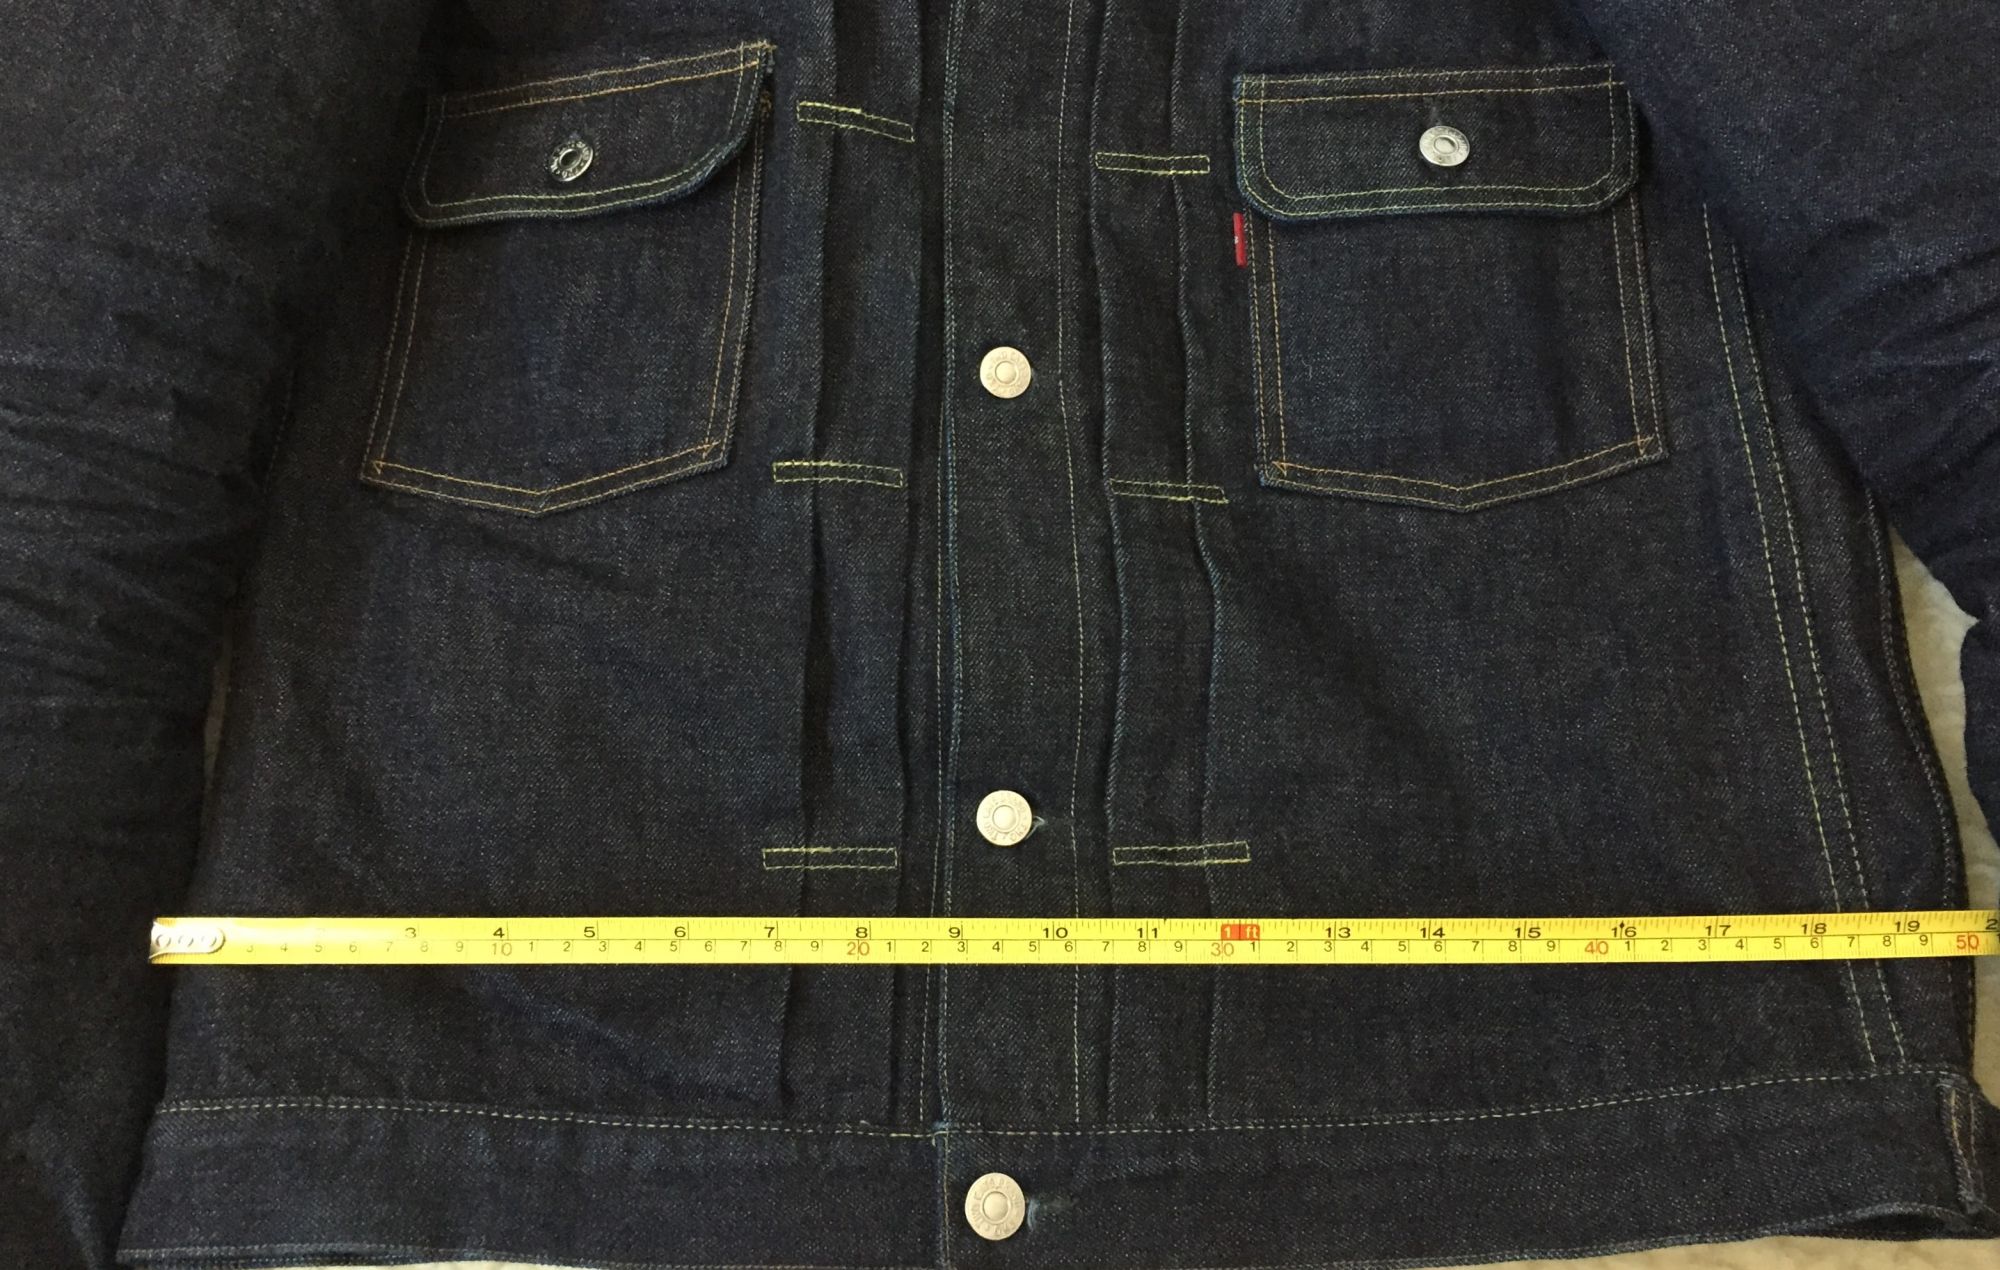 TCB - Page 186 - superdenim - superfuture®